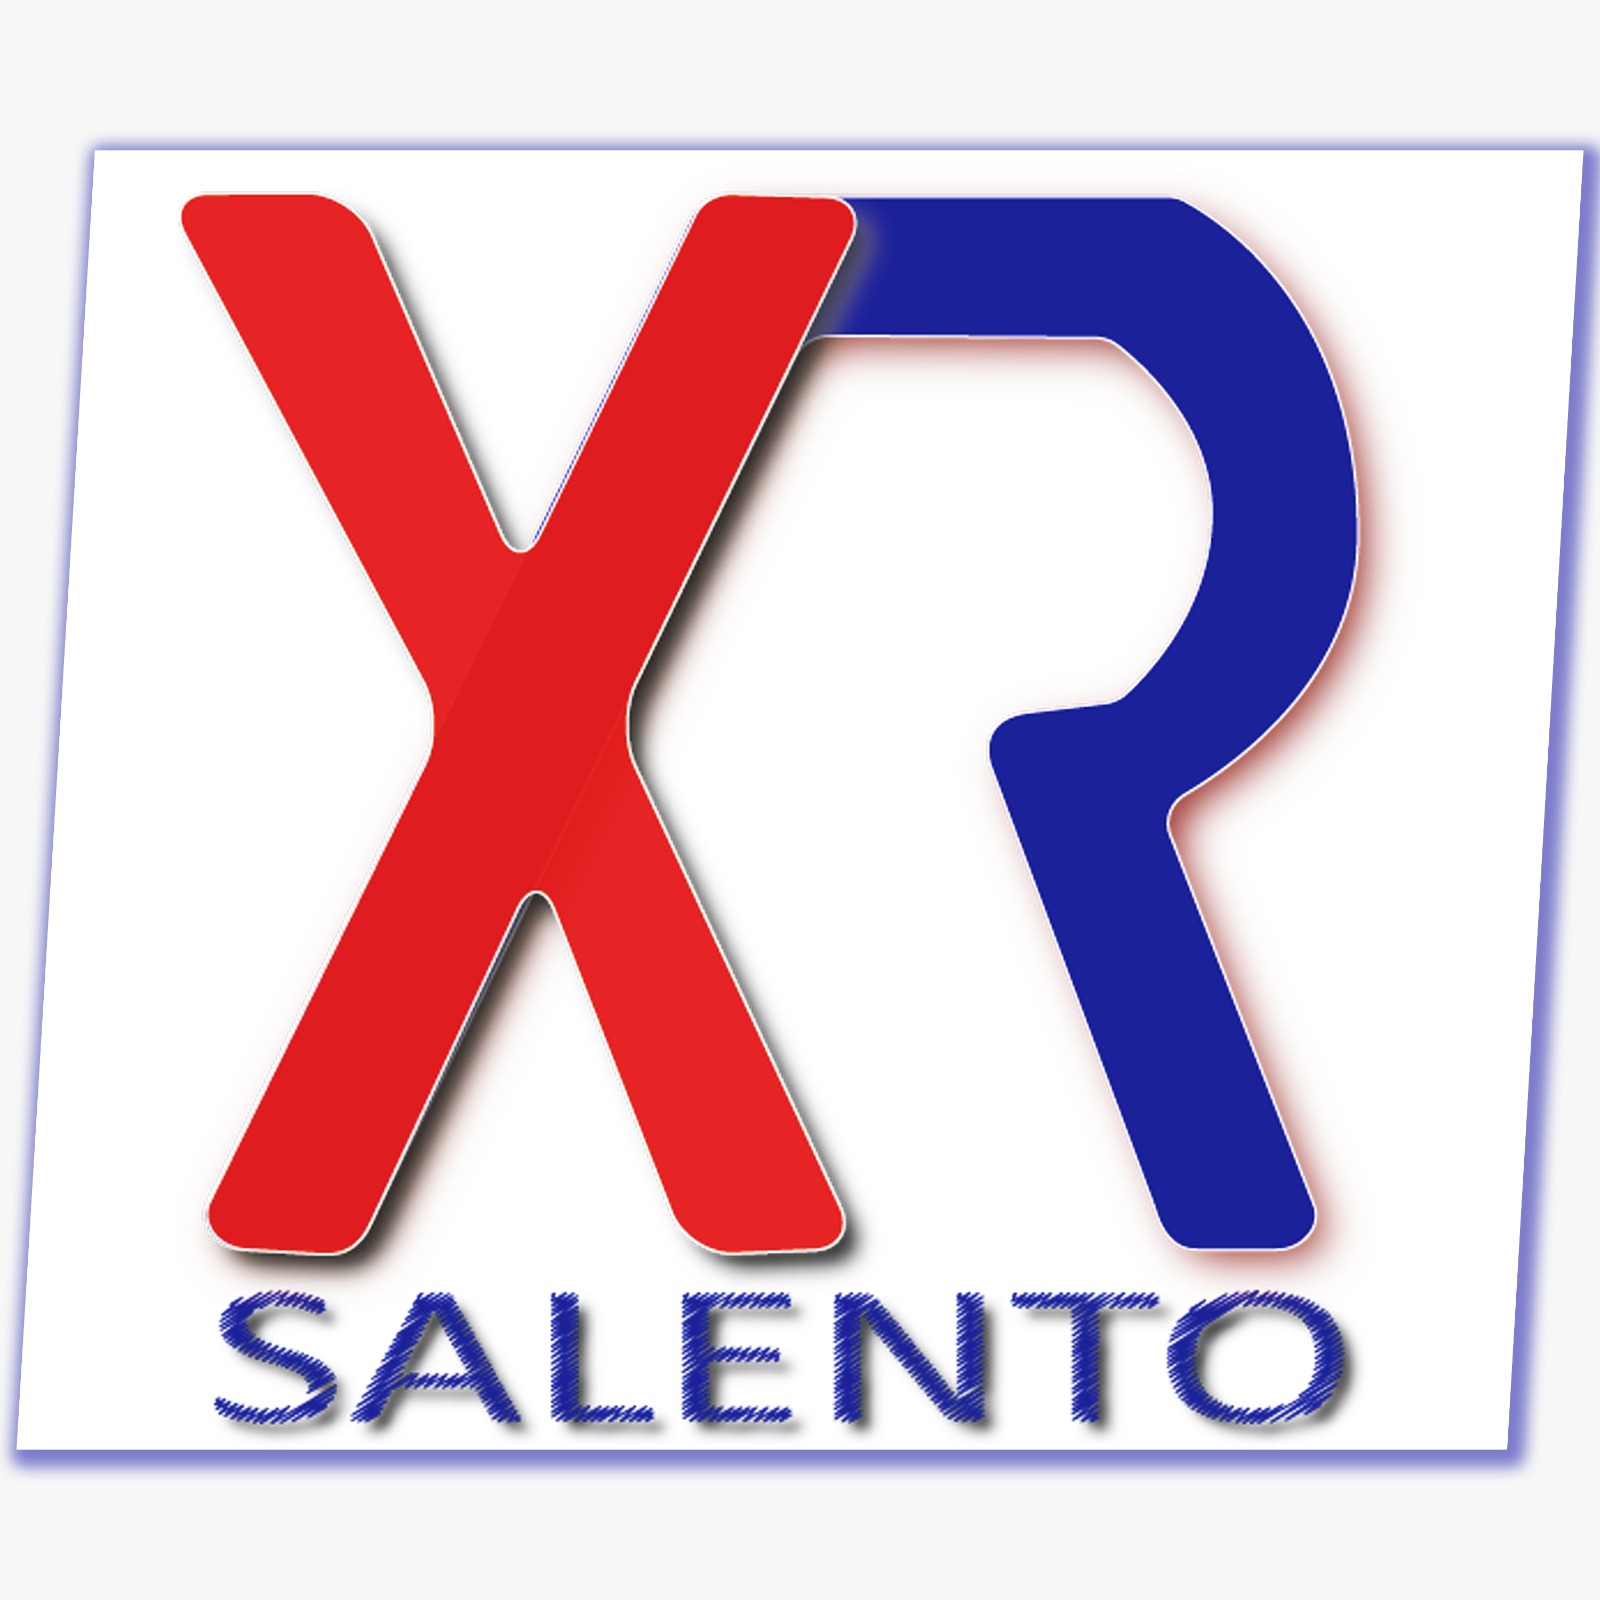 International Conference on eXtended Reality (XR Salento 2023)